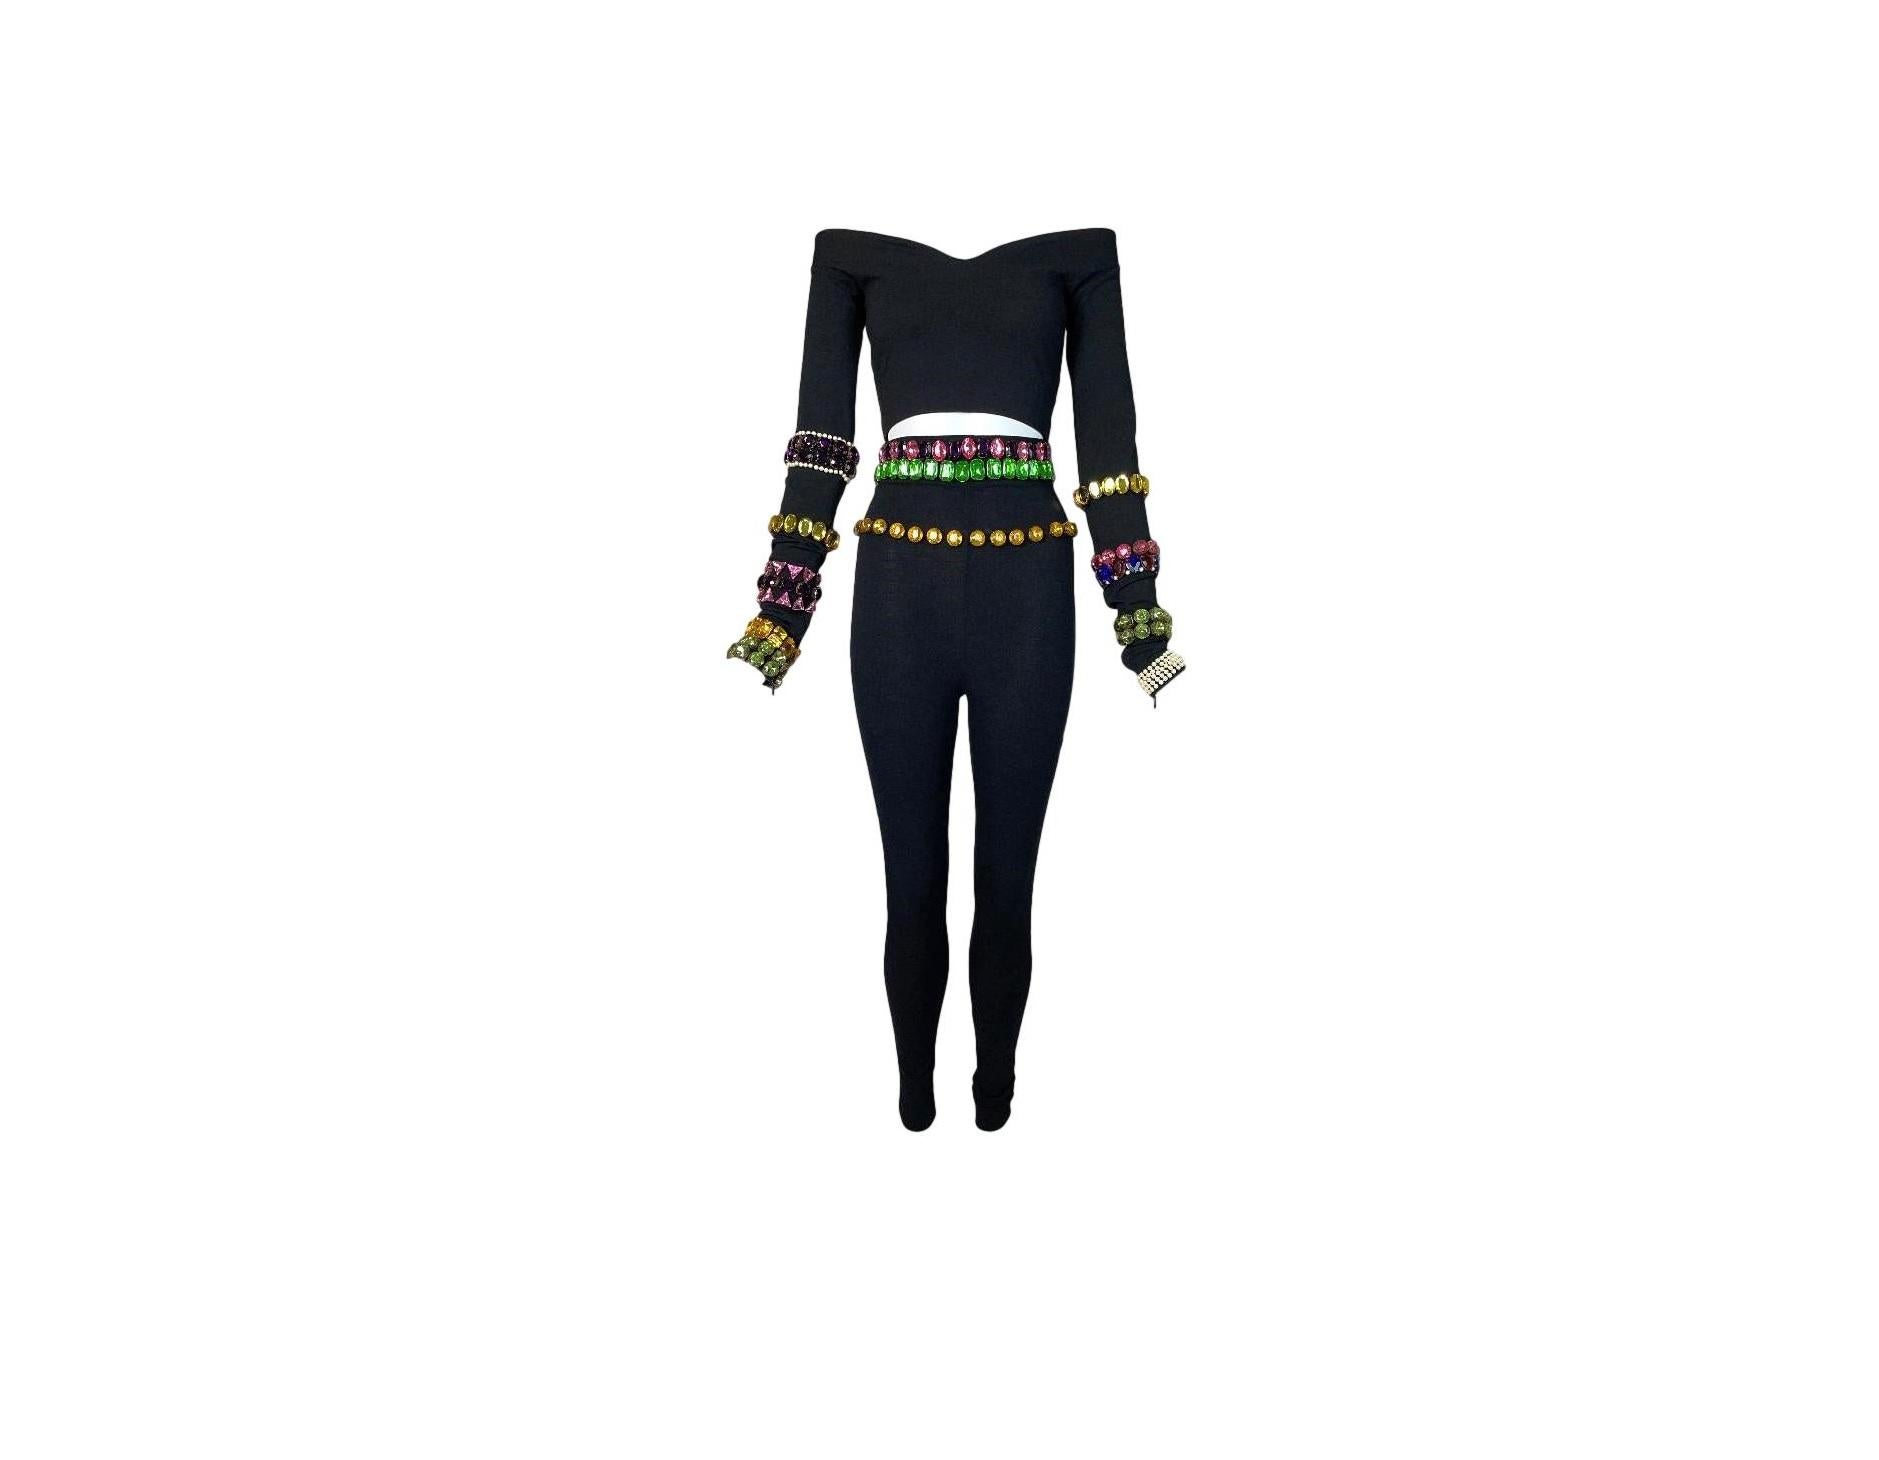 **THANK YOU FOR SHOPPING WITH MES DEUX FILLES**

DESIGNER: F/W 1991 Dolce & Gabbana
CONDITION: Good- no flaws
FABRIC: Wool & Nylon
COUNTRY MADE: Italy
SIZE: Top is 44- Leggings are 42
MEASUREMENTS; provided as a courtesy, not a guarantee of